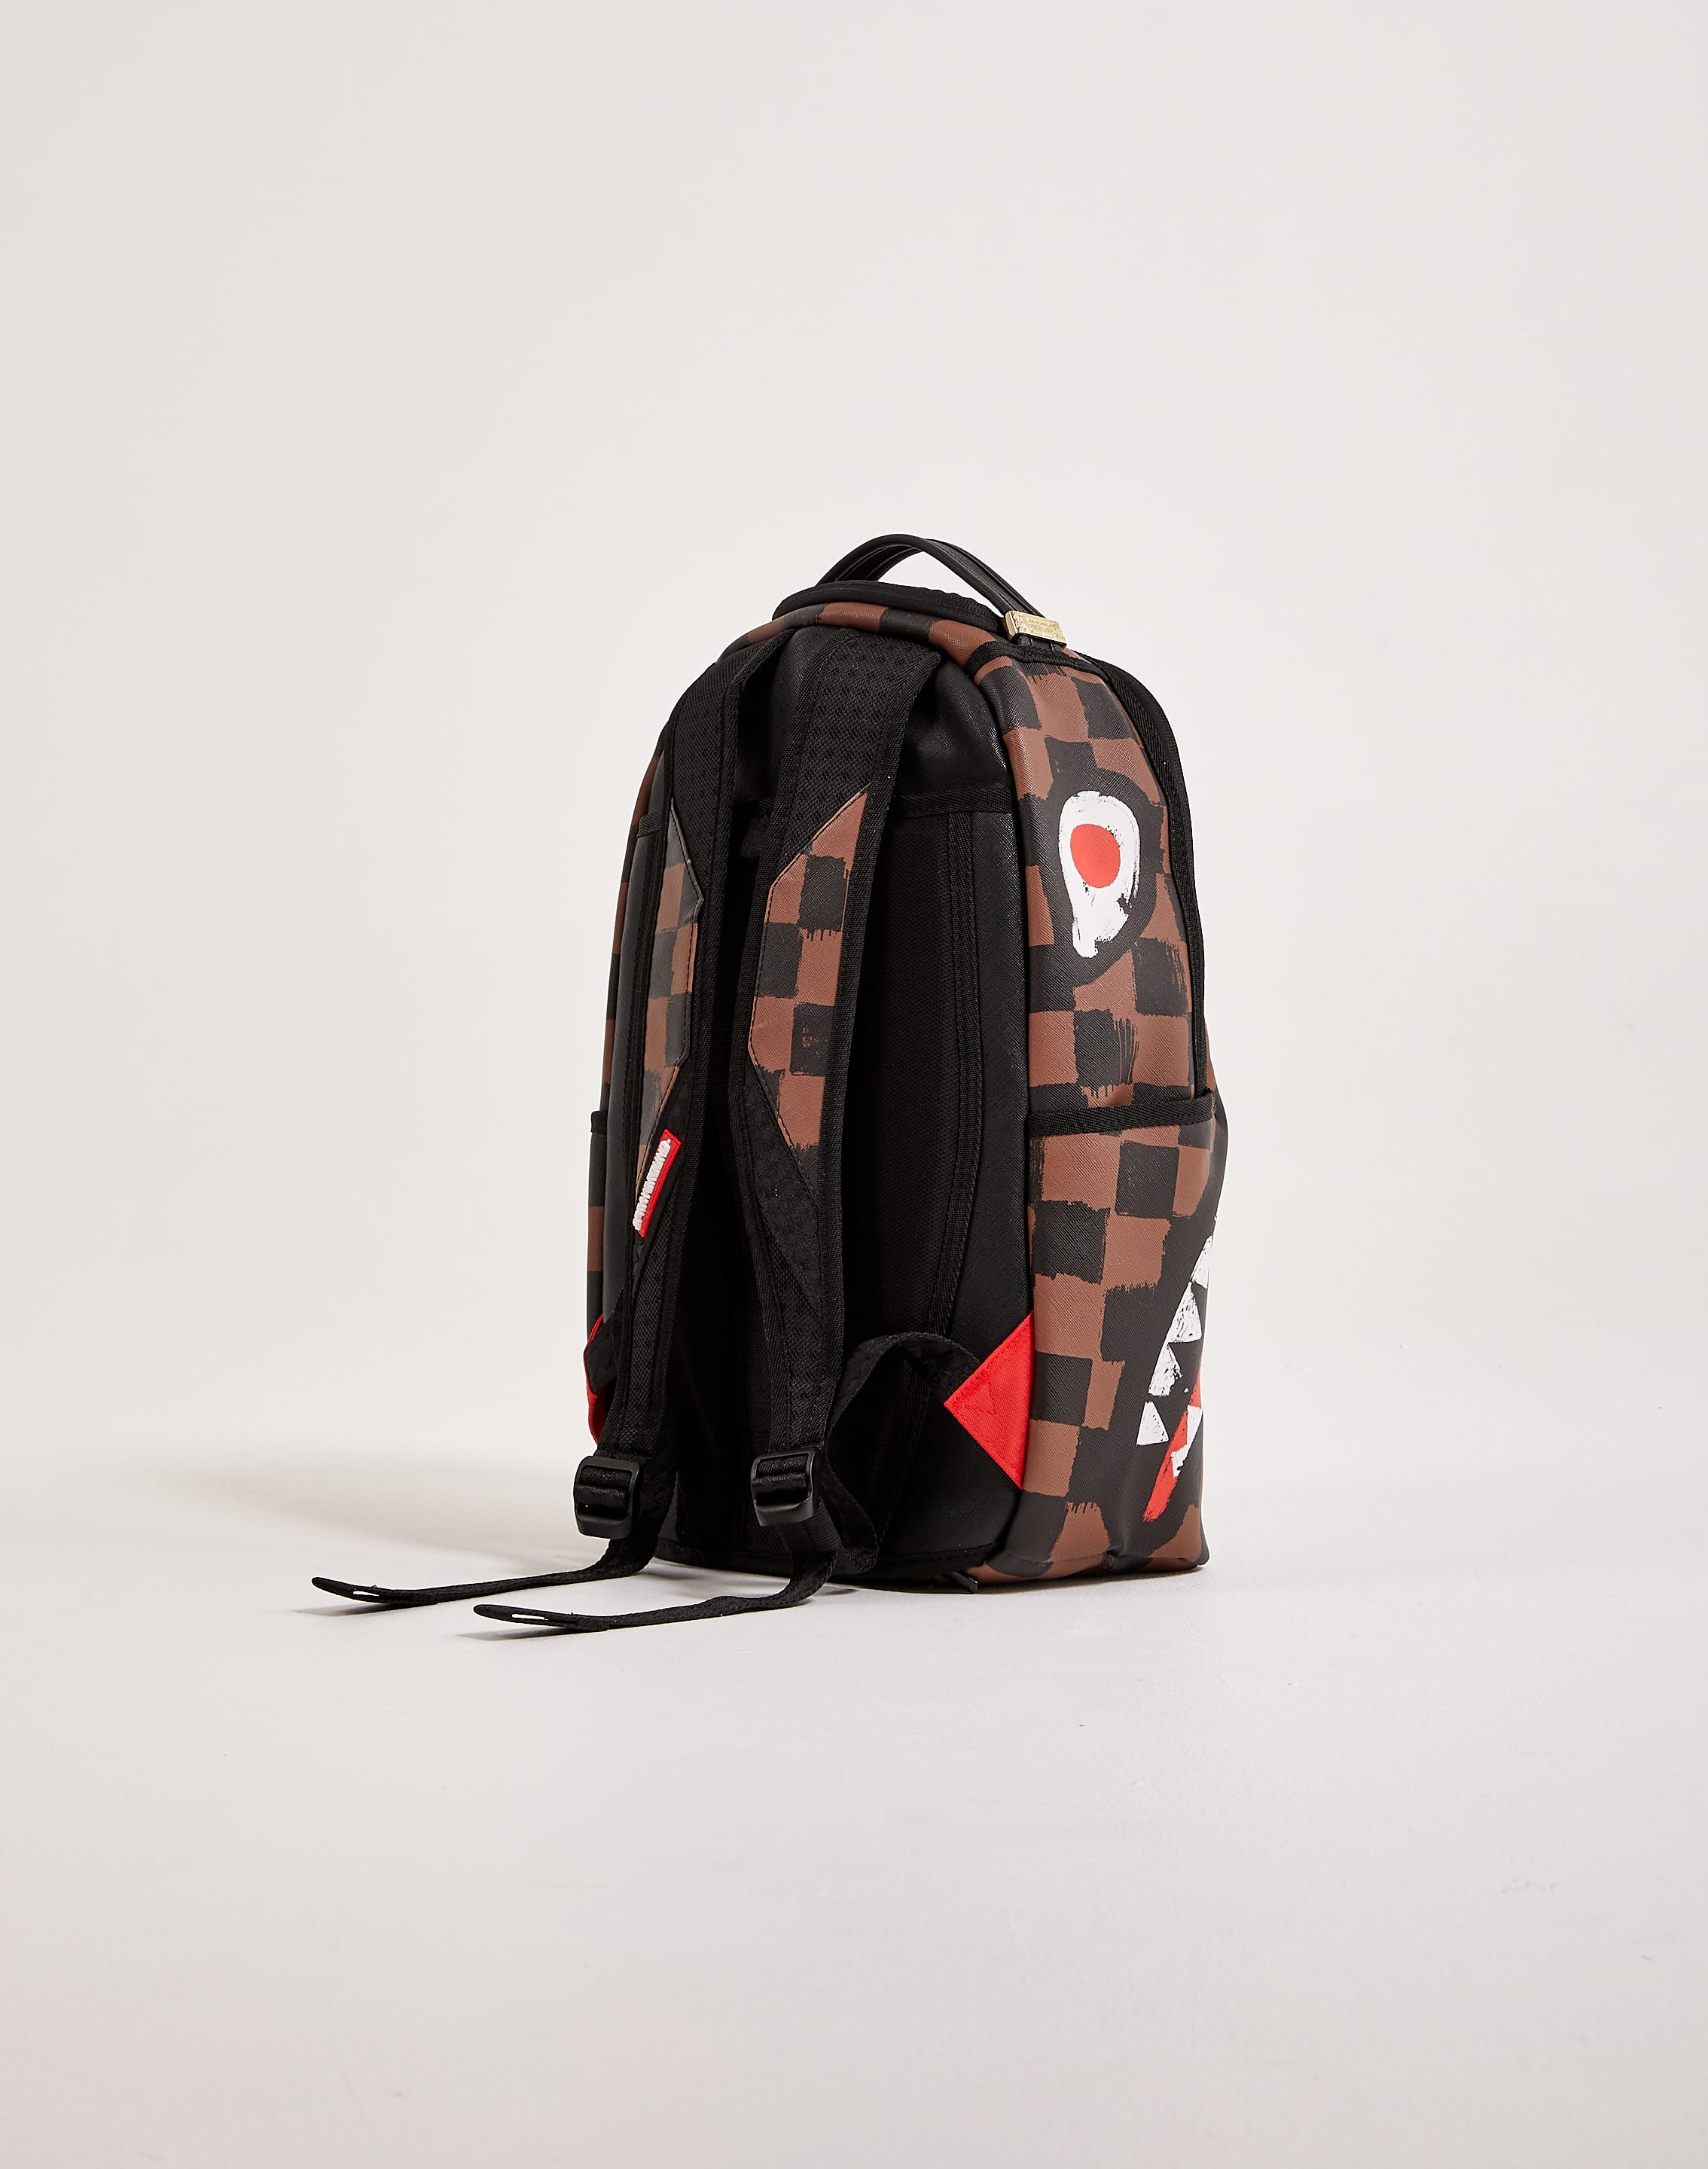 SPRAYGROUND shark backpack in Paris painted, brown, One size